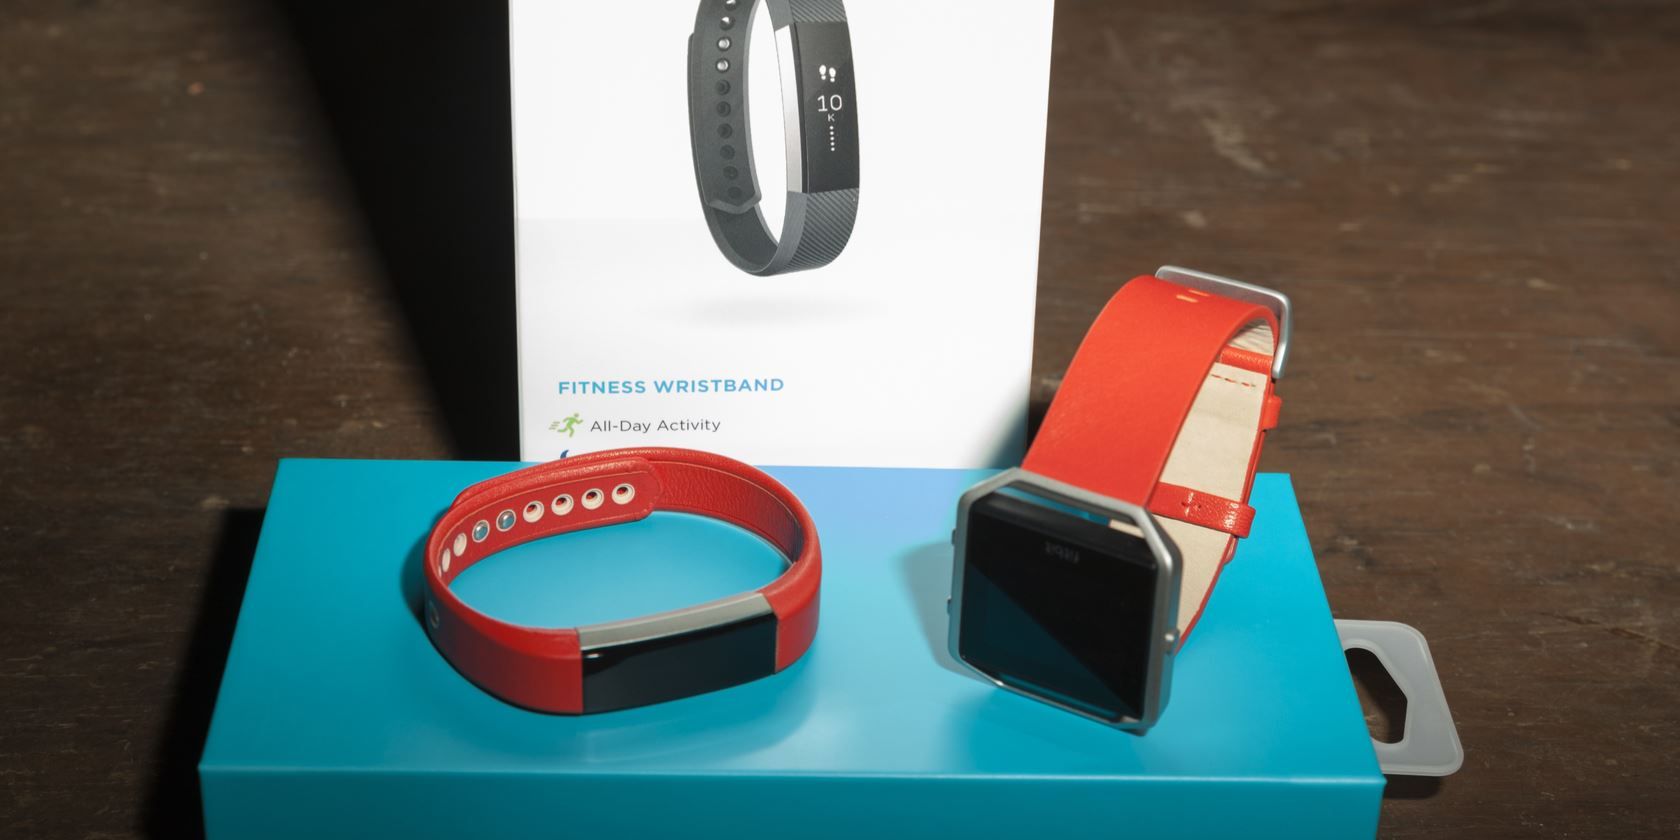 Fitbit devices on a Fitbit product box